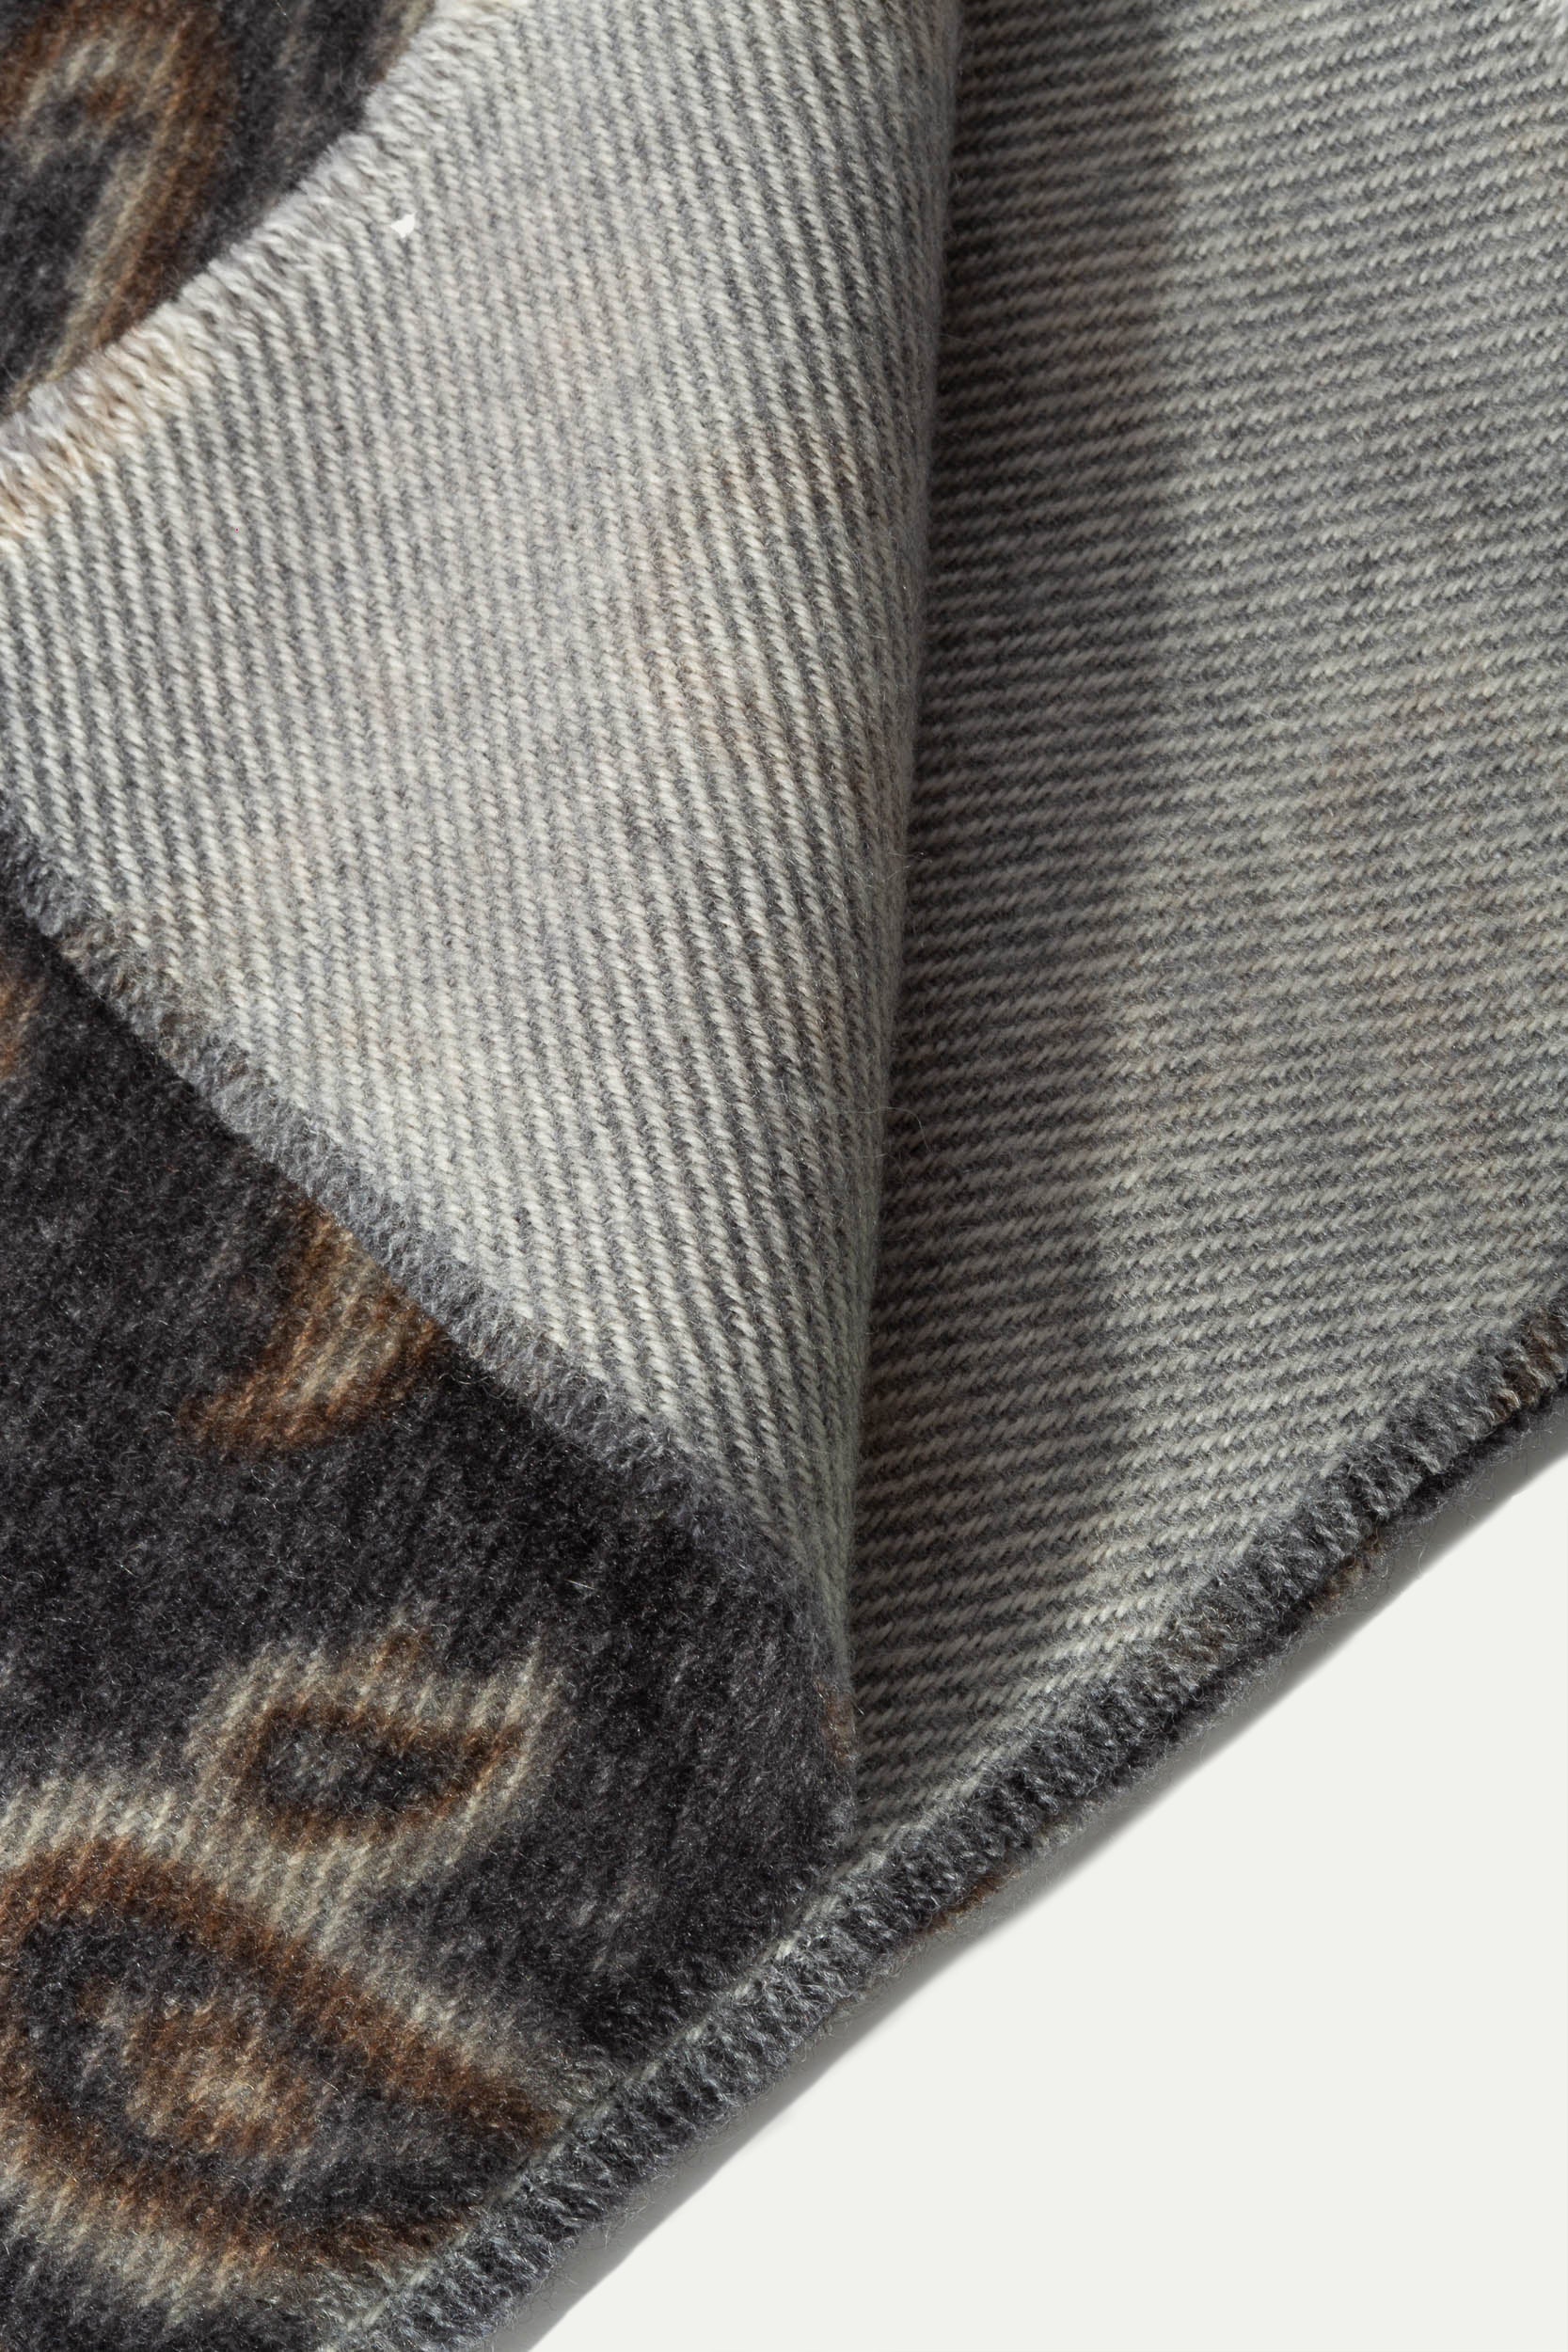  grey paisley scarf for men, grey patterned scarf for men, grey wool paisley scarf, grey wool scarf for men, écharpe grise à motif, écharpe grise pour homme, écharpe grise homme, écharpe grise homme, écharpe grise laine homme